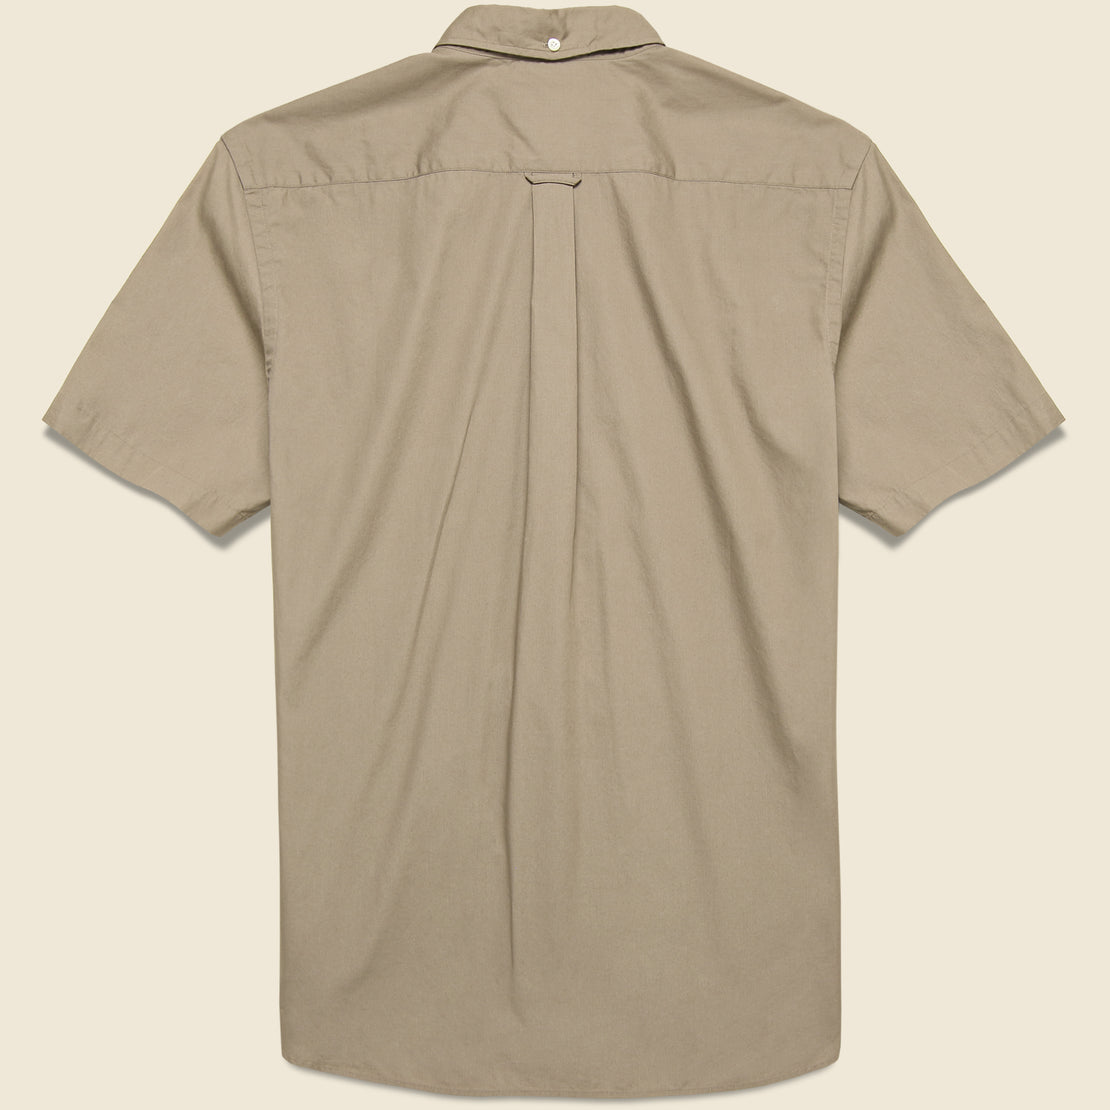 Short Sleeve Broad Cloth Shirt - Beige - BEAMS+ - STAG Provisions - Tops - S/S Woven - Solid